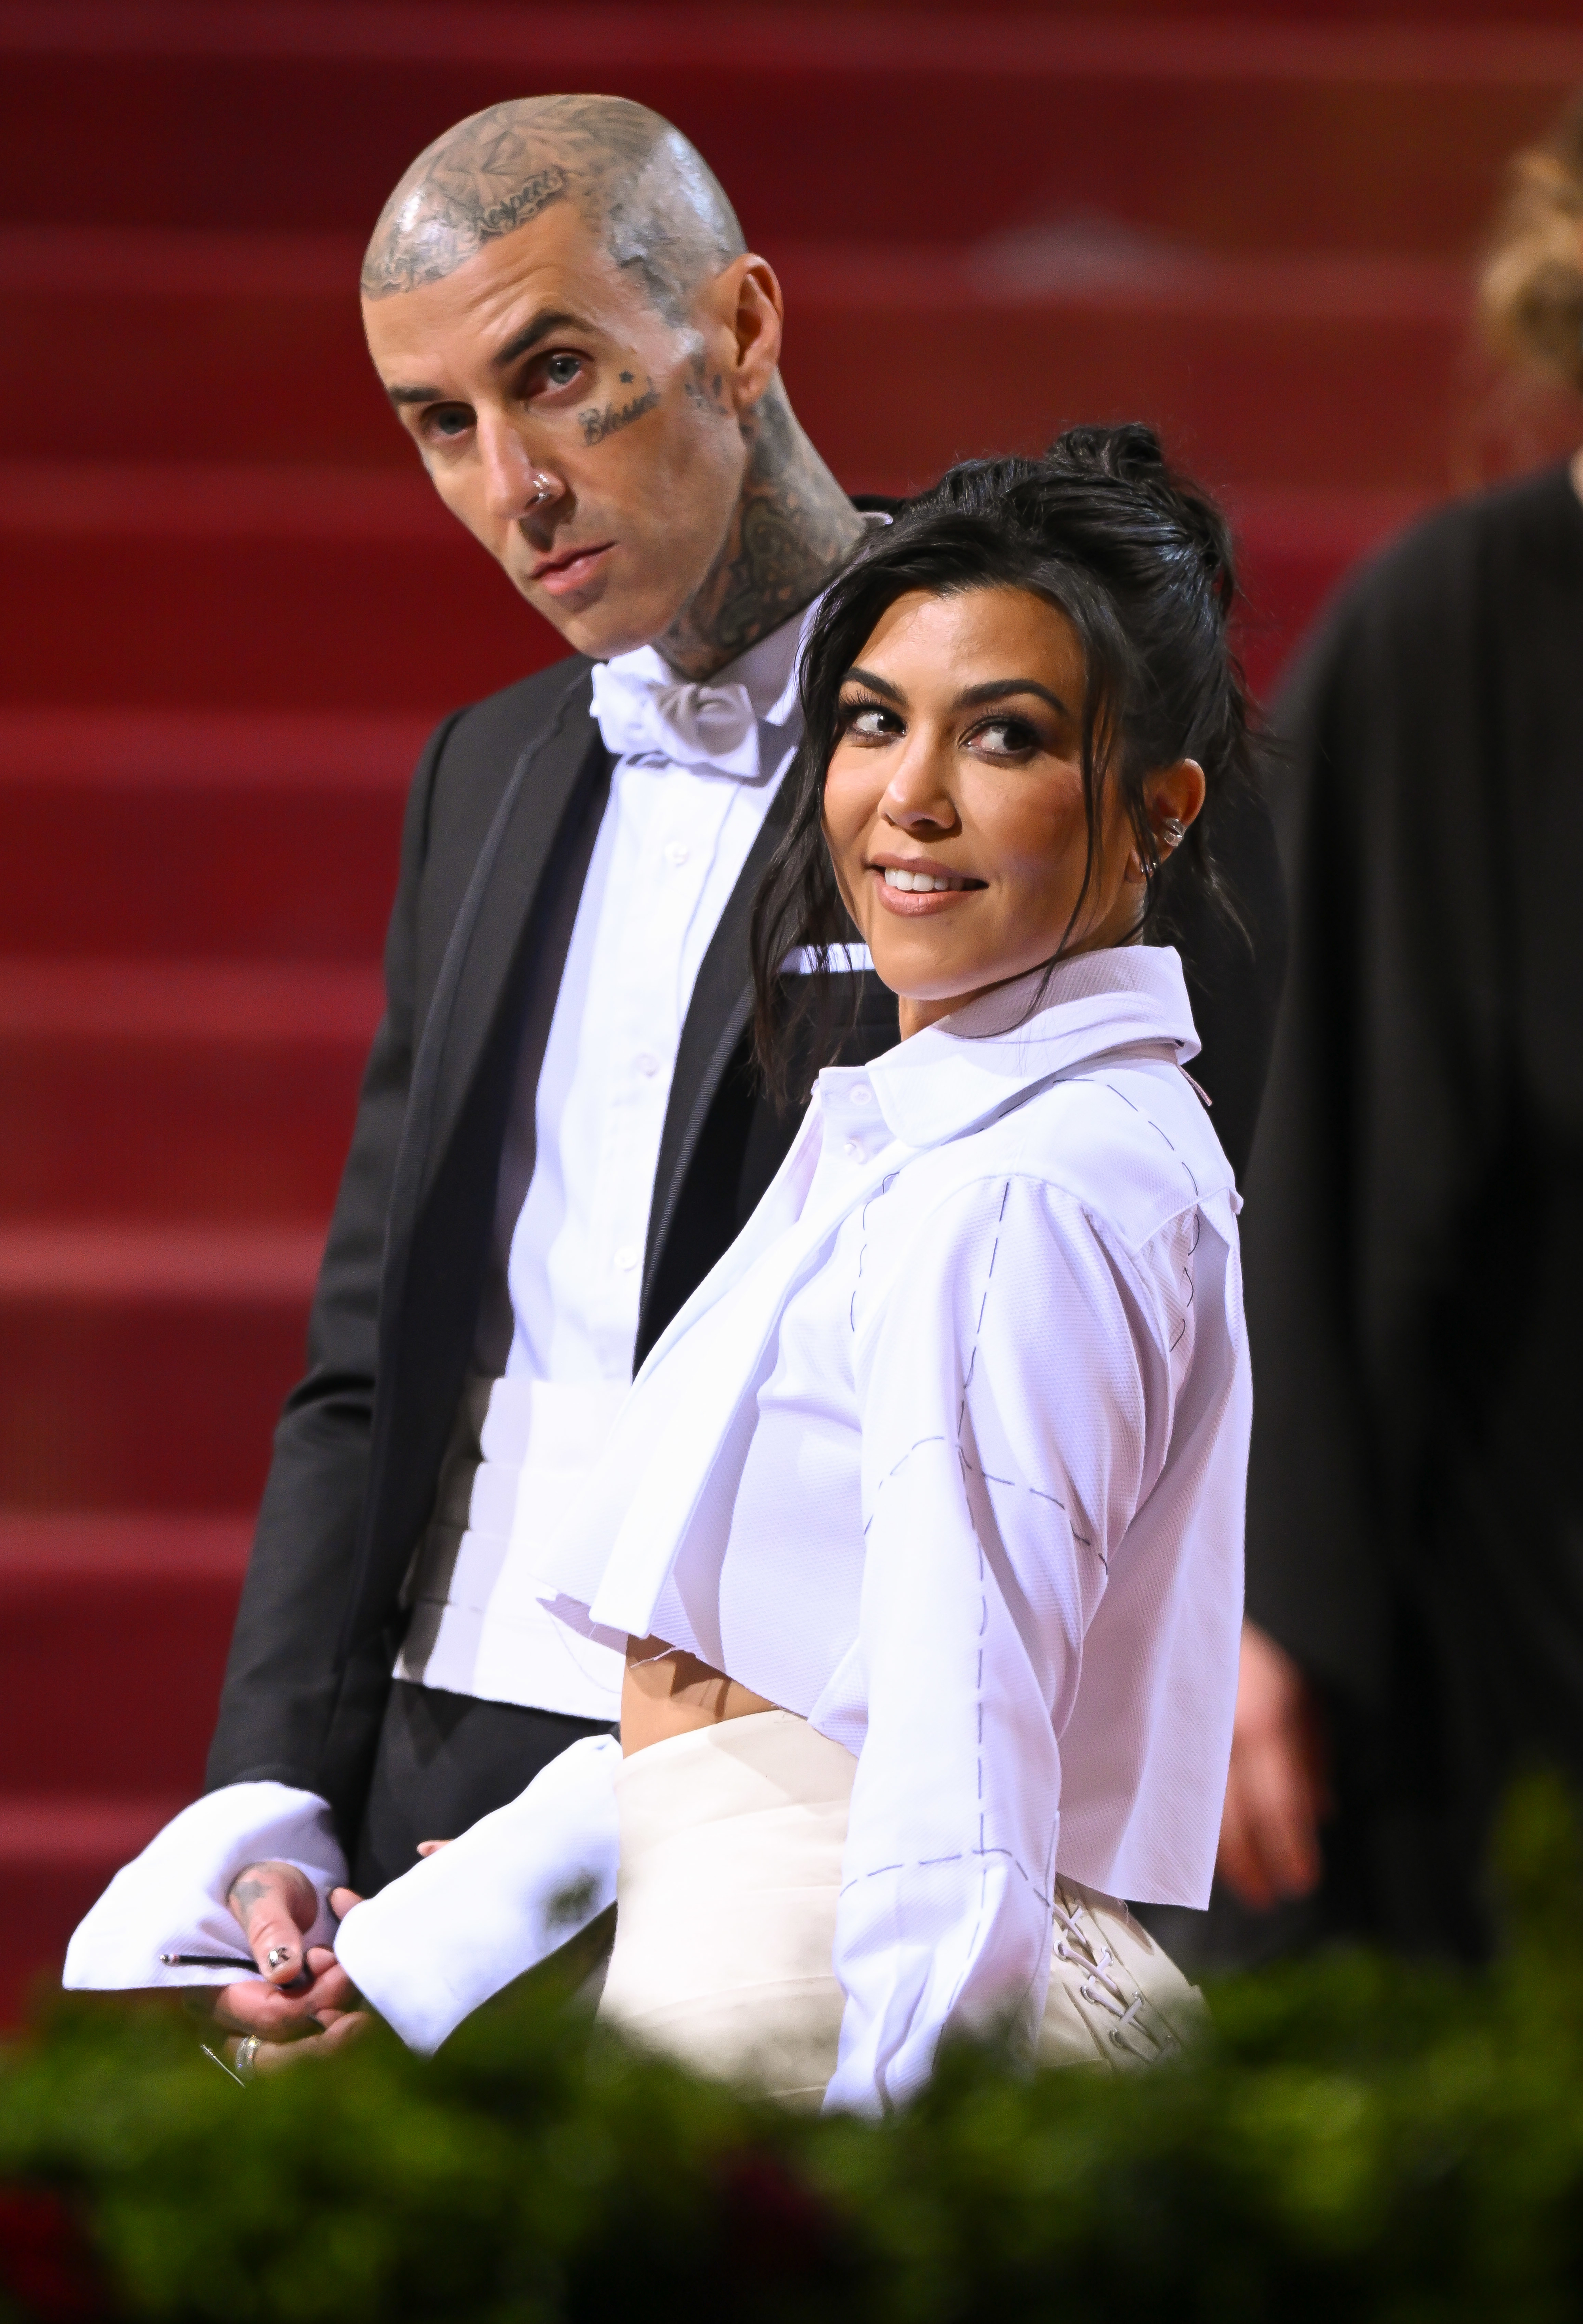 Close-up of Kourtney and Travis at a media event